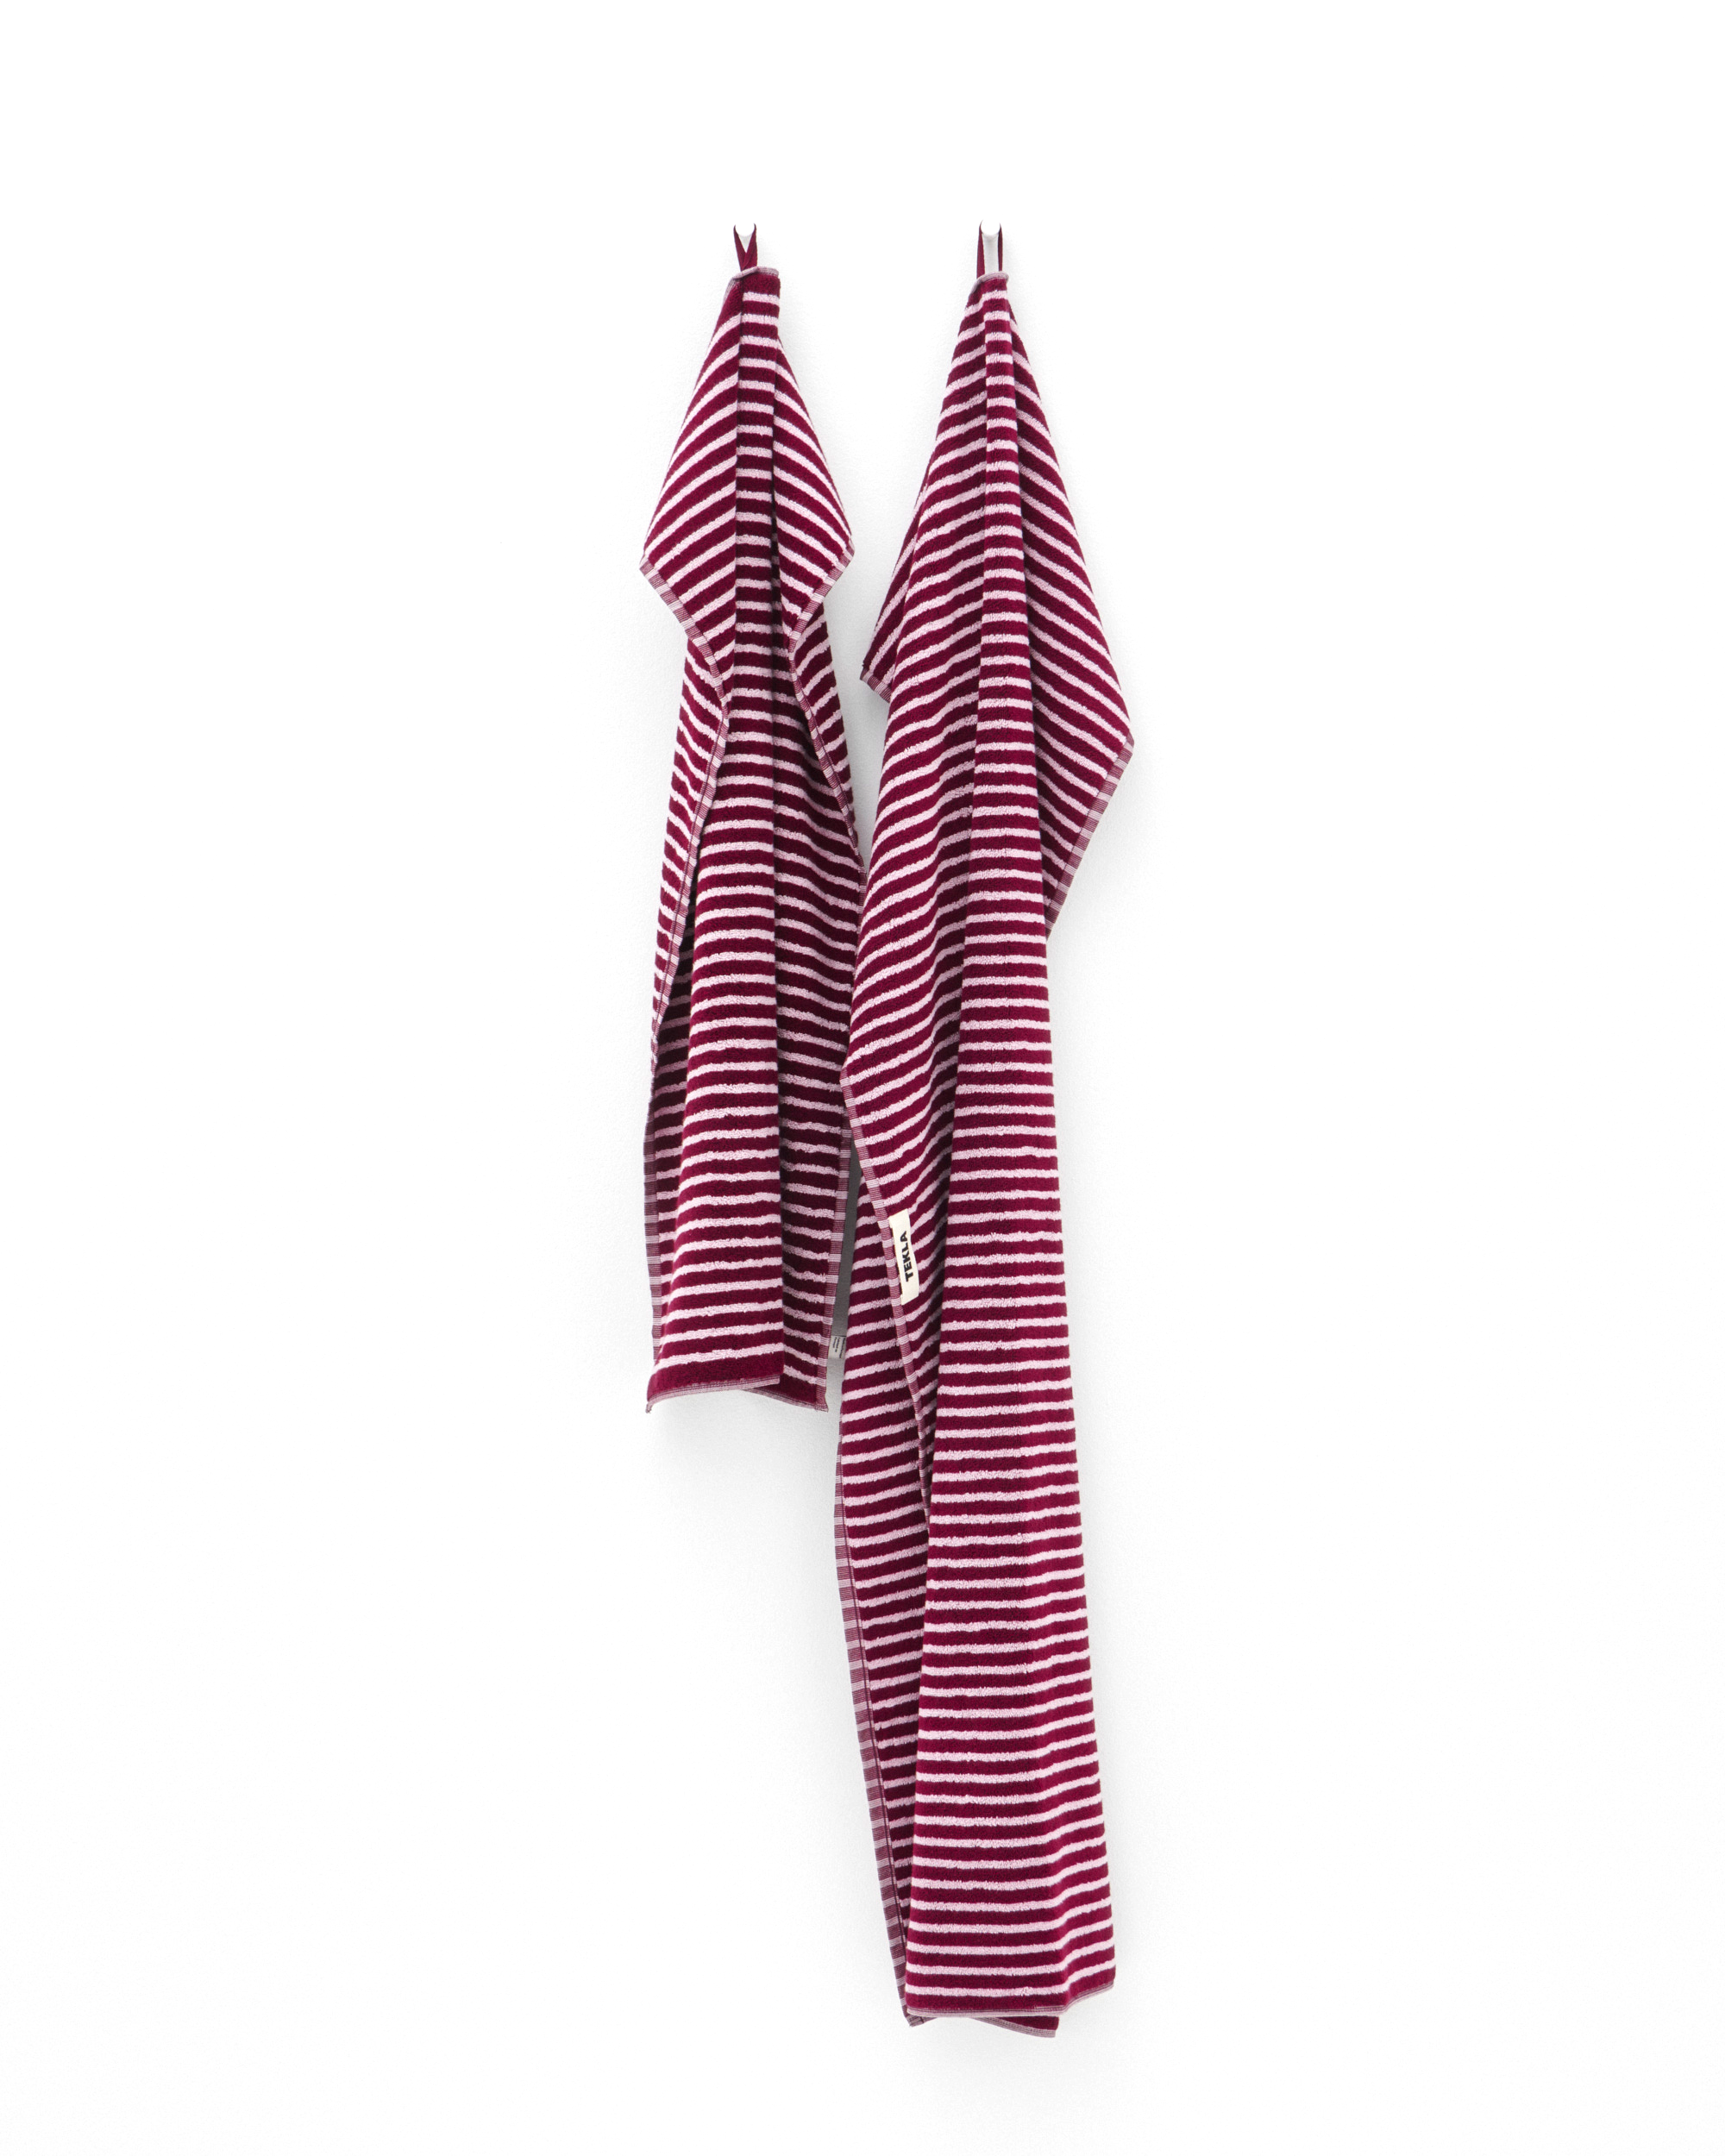 Hand Towel (Striped) - Red / Rose